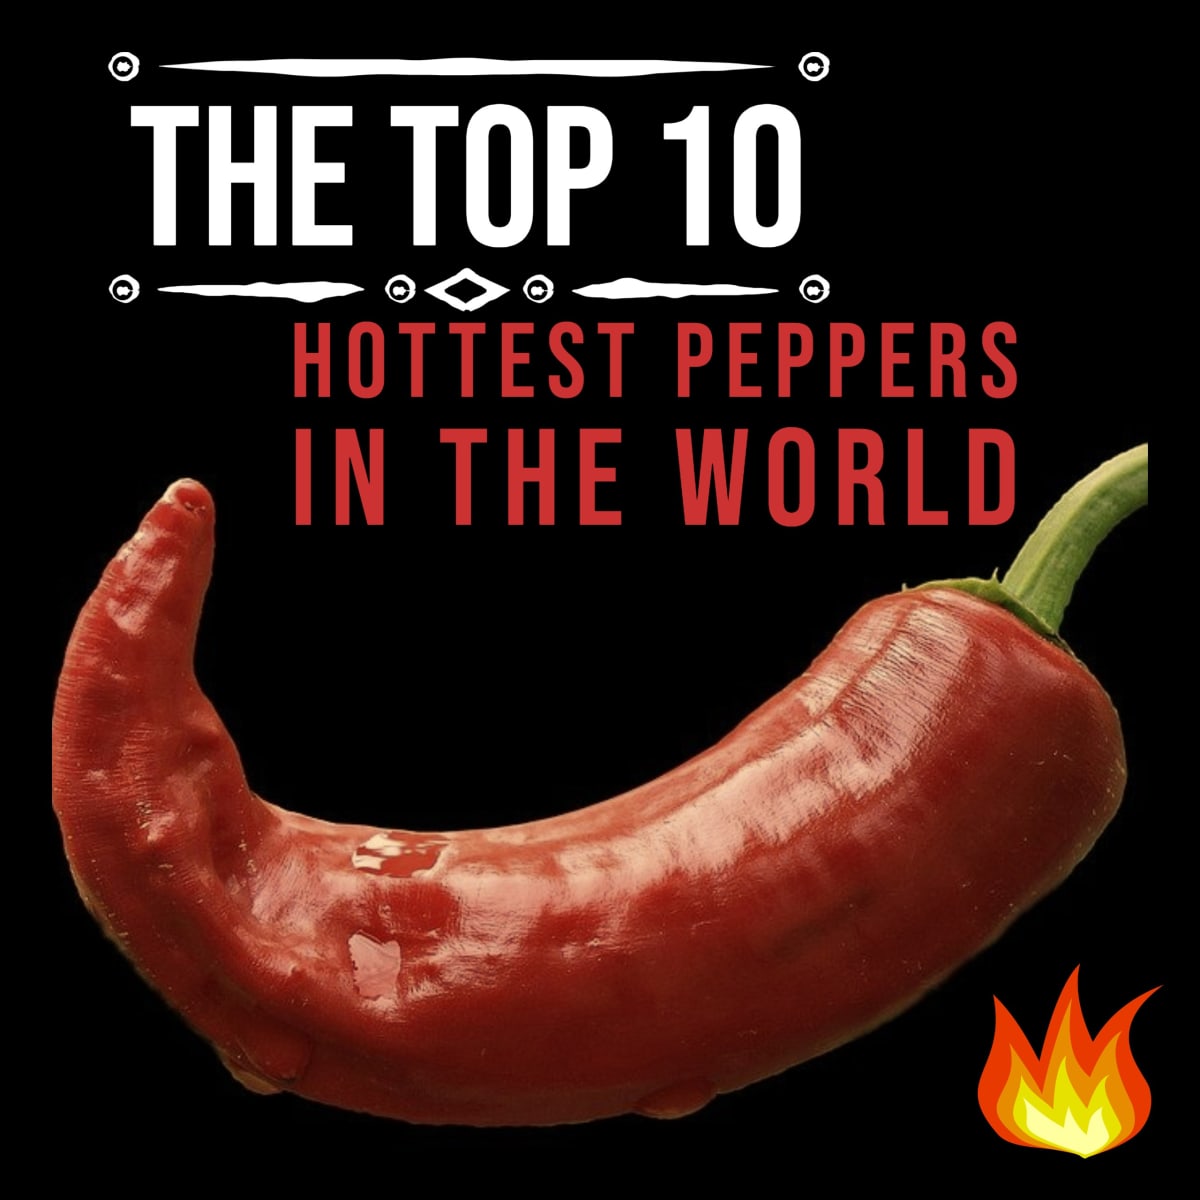 Top Hottest Peppers in the World